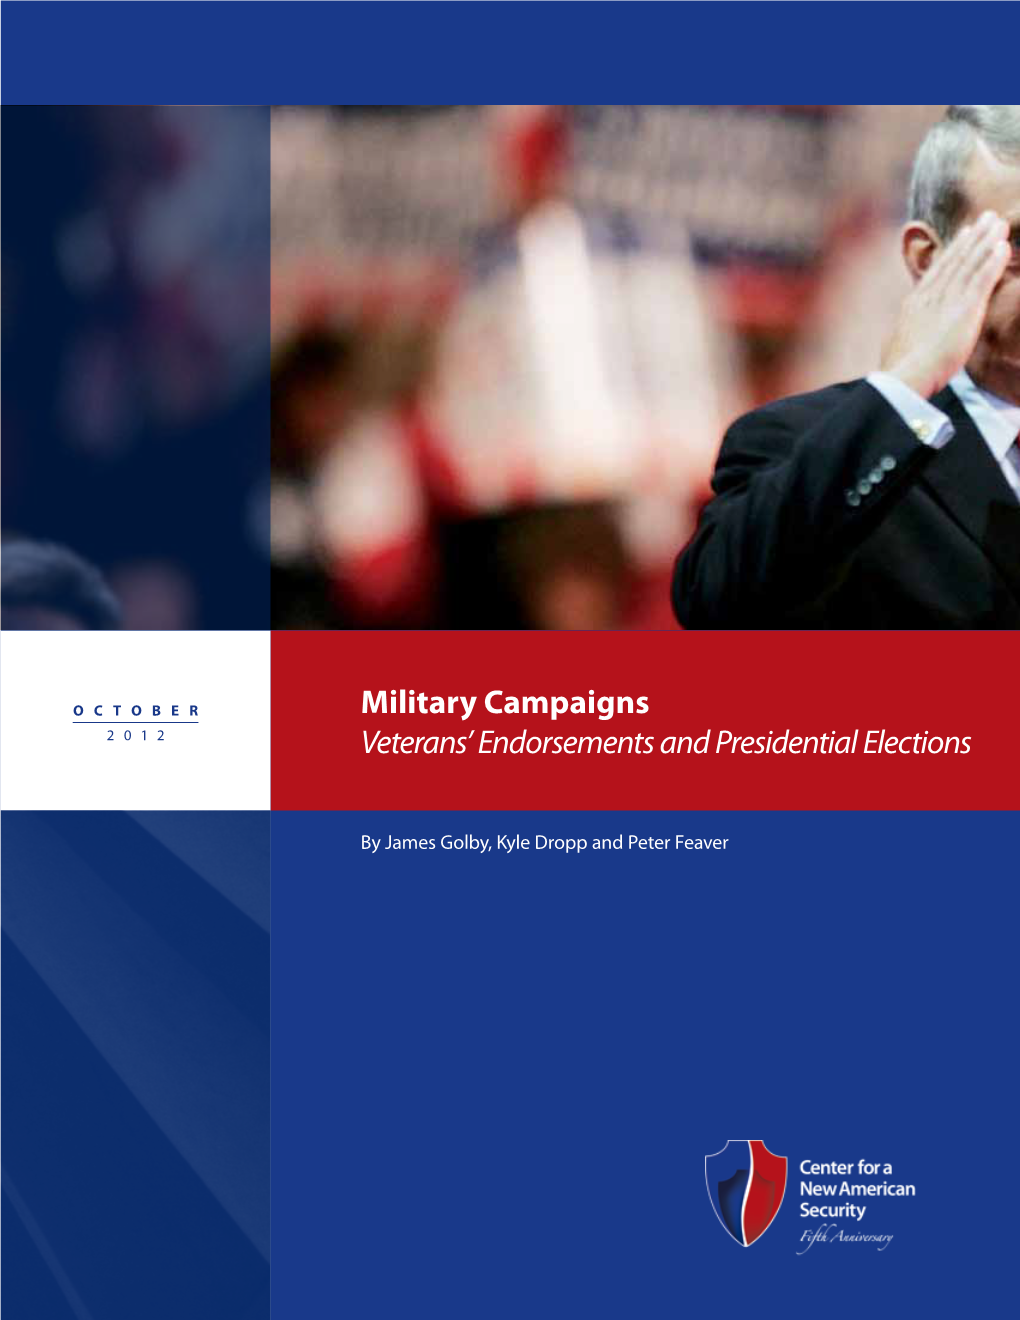 Military Campaigns Veterans' Endorsements and Presidential